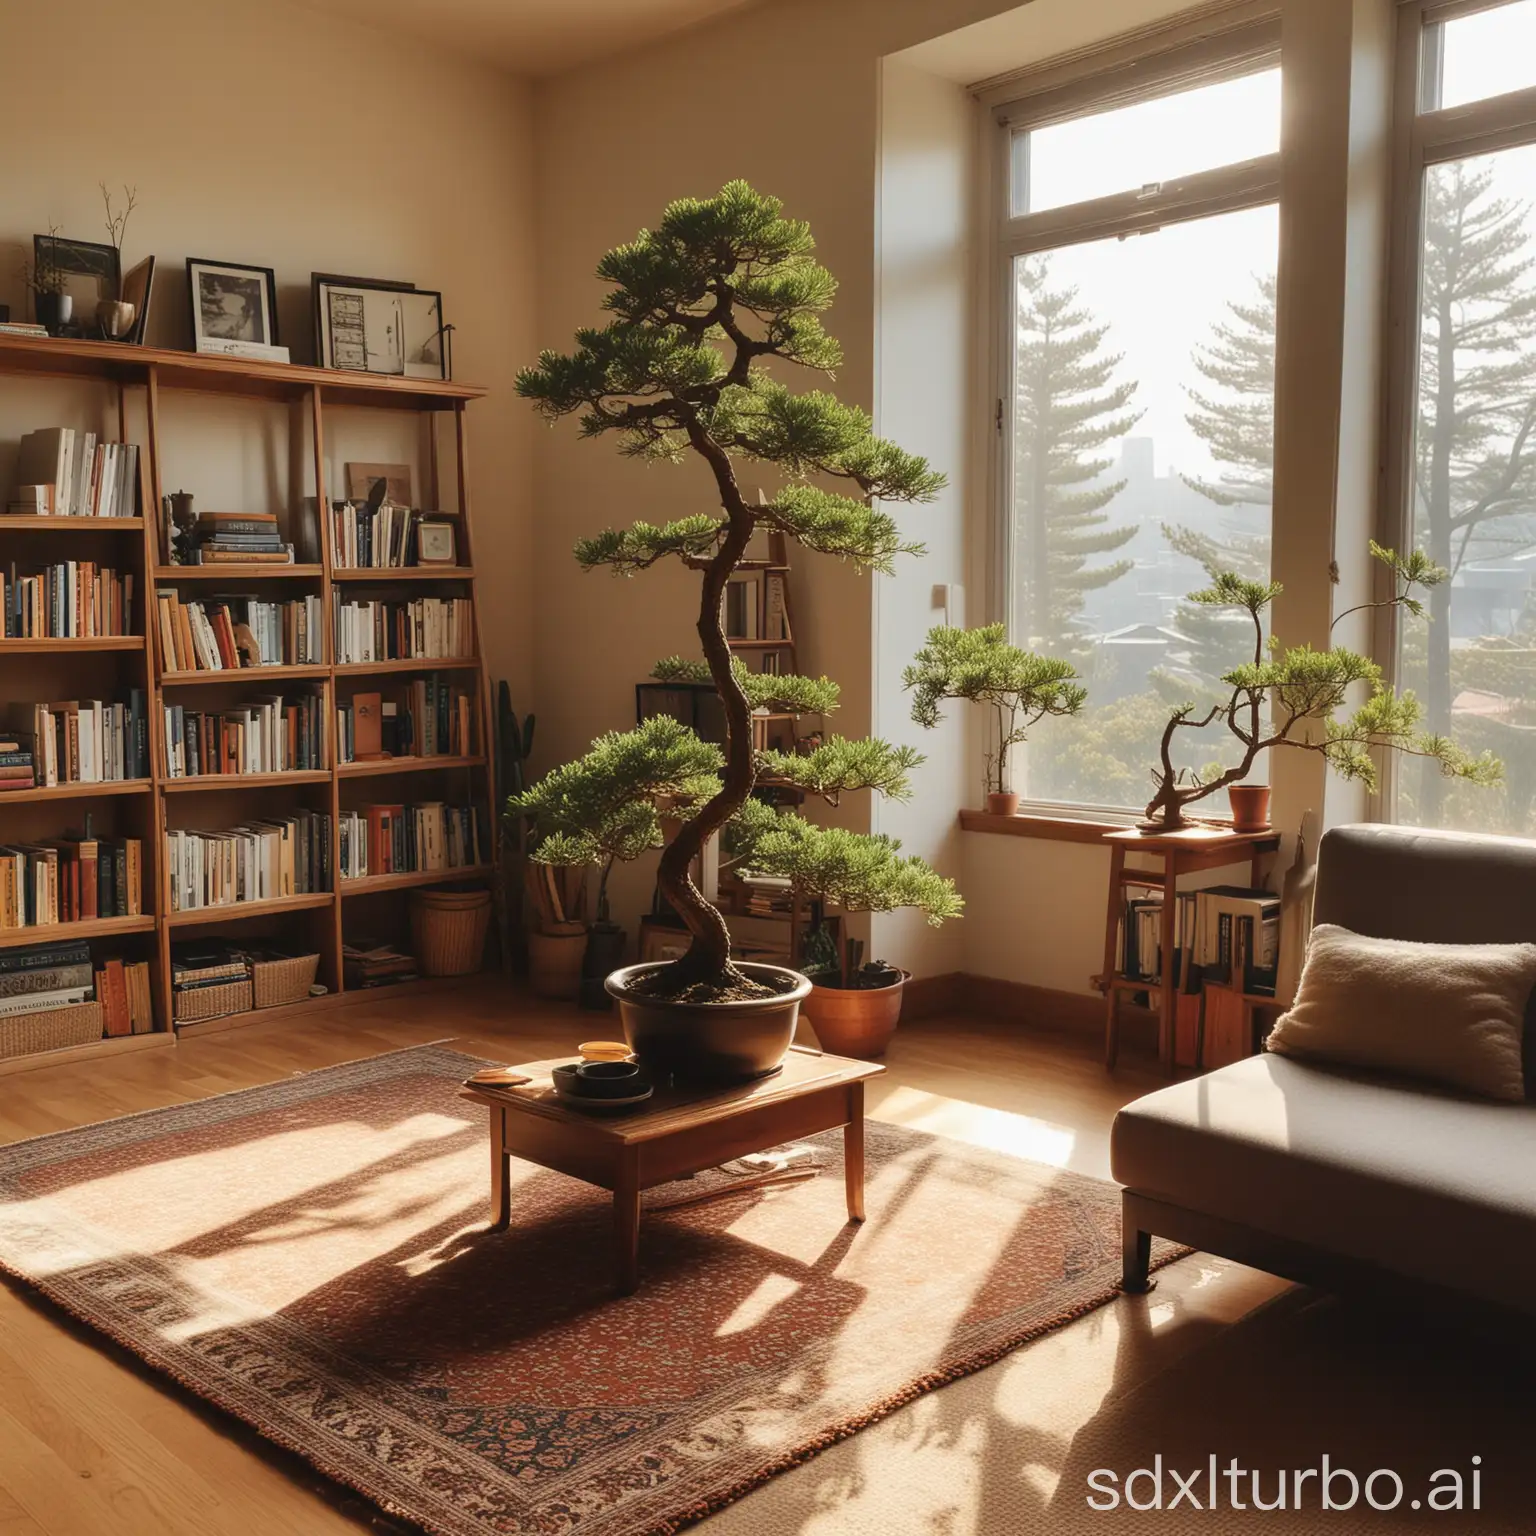 In the living room, there is a sofa, a bookcase, a carpet, and on the desk, there is coffee and an open book. There is also a pot of bonsai pine on the desk, with sunlight streaming through the window, shining on the pot.